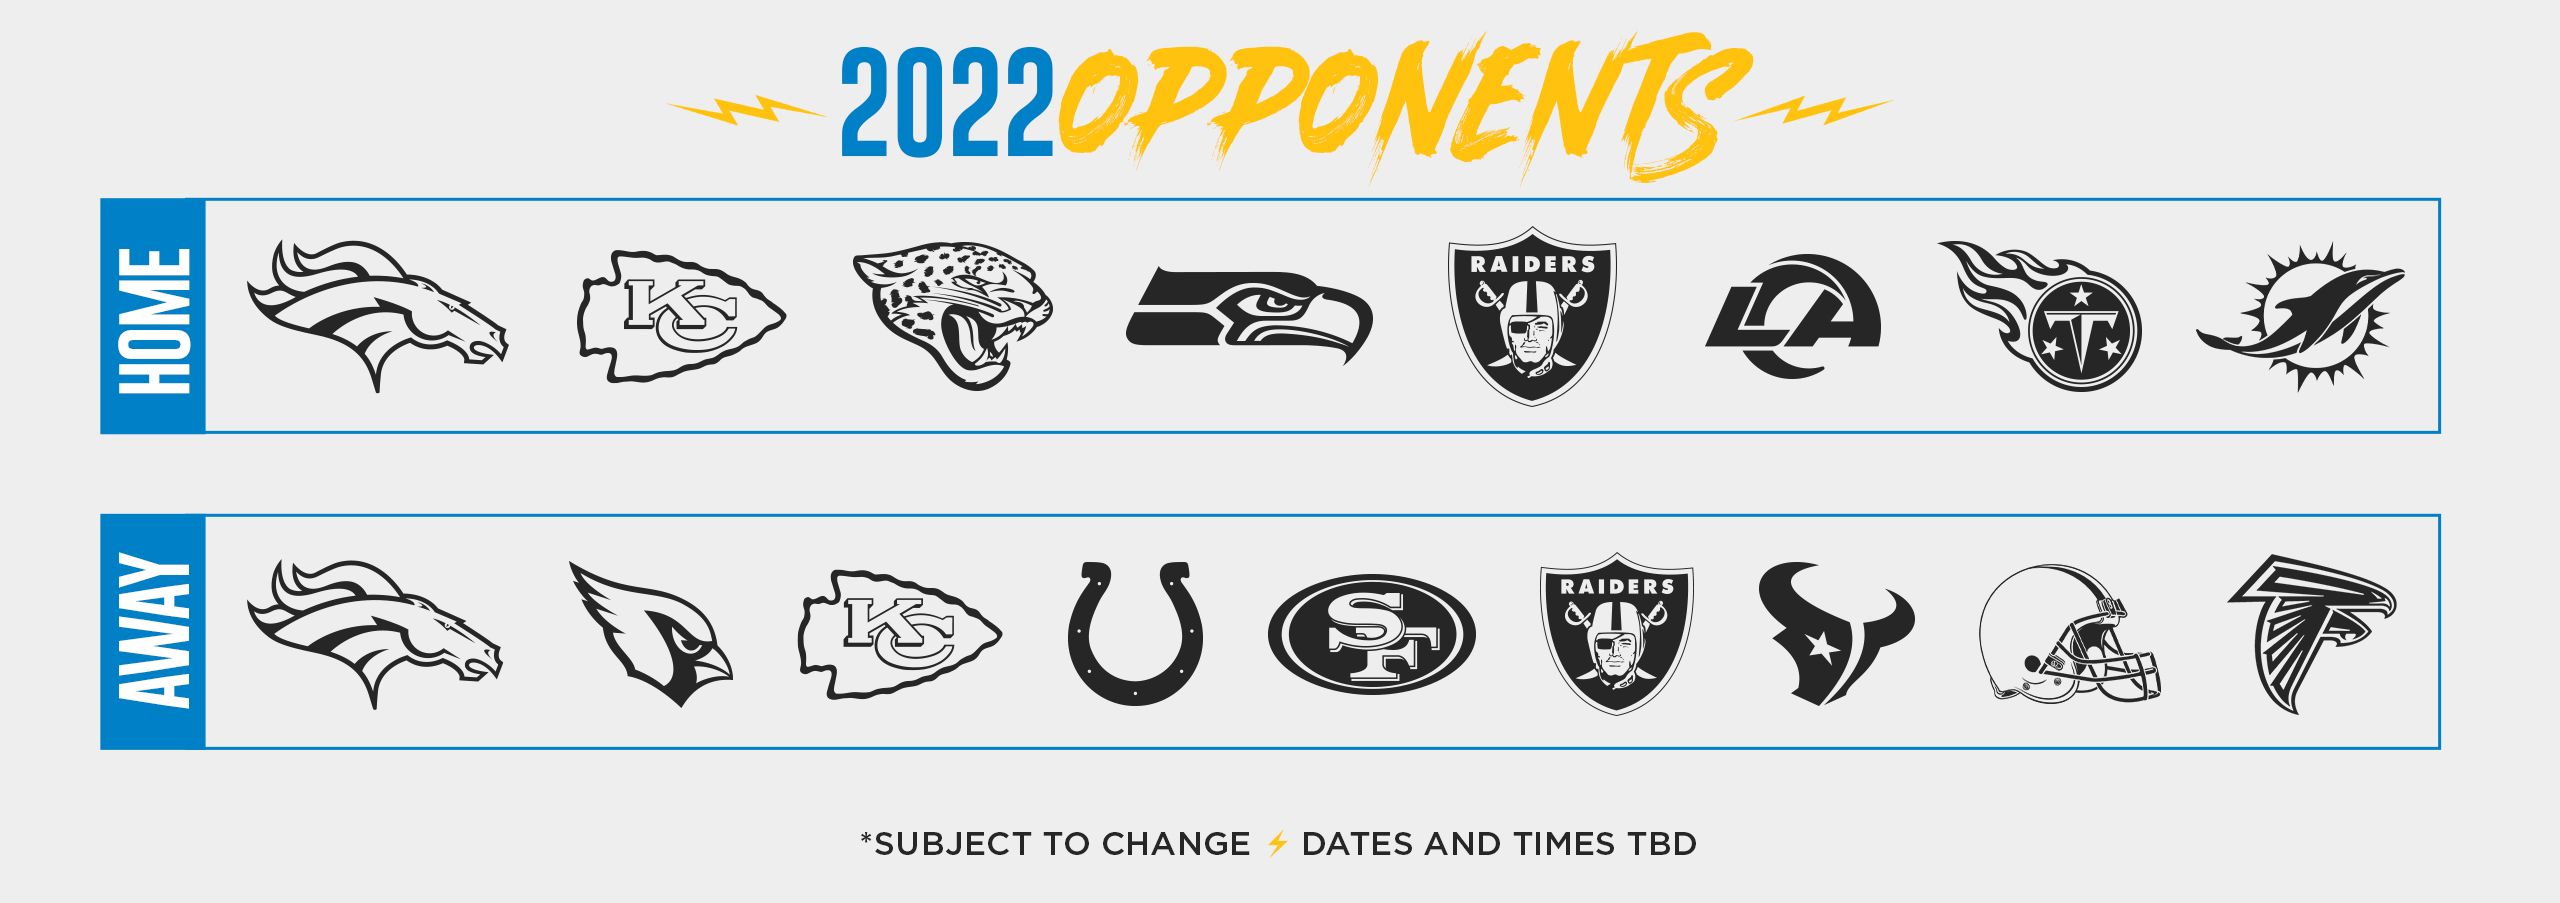 La Chargers Schedule 2022 Chargers 2022 Future Opponents | Los Angeles Chargers - Chargers.com